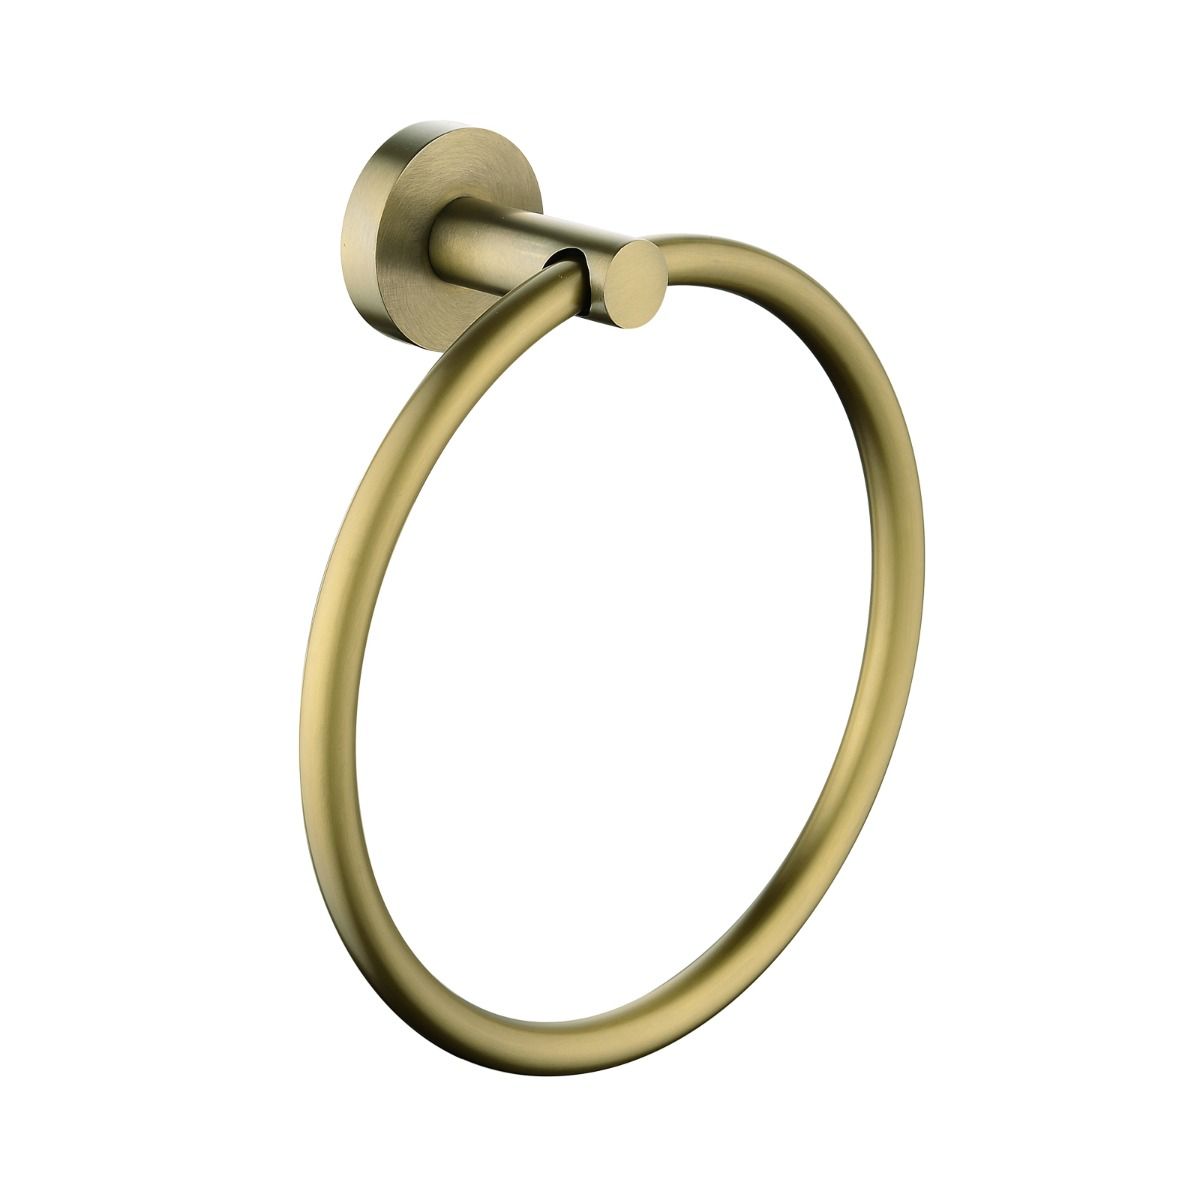 Pentro Brushed Yellow Gold Wall Mounted Round Hand Towel Ring